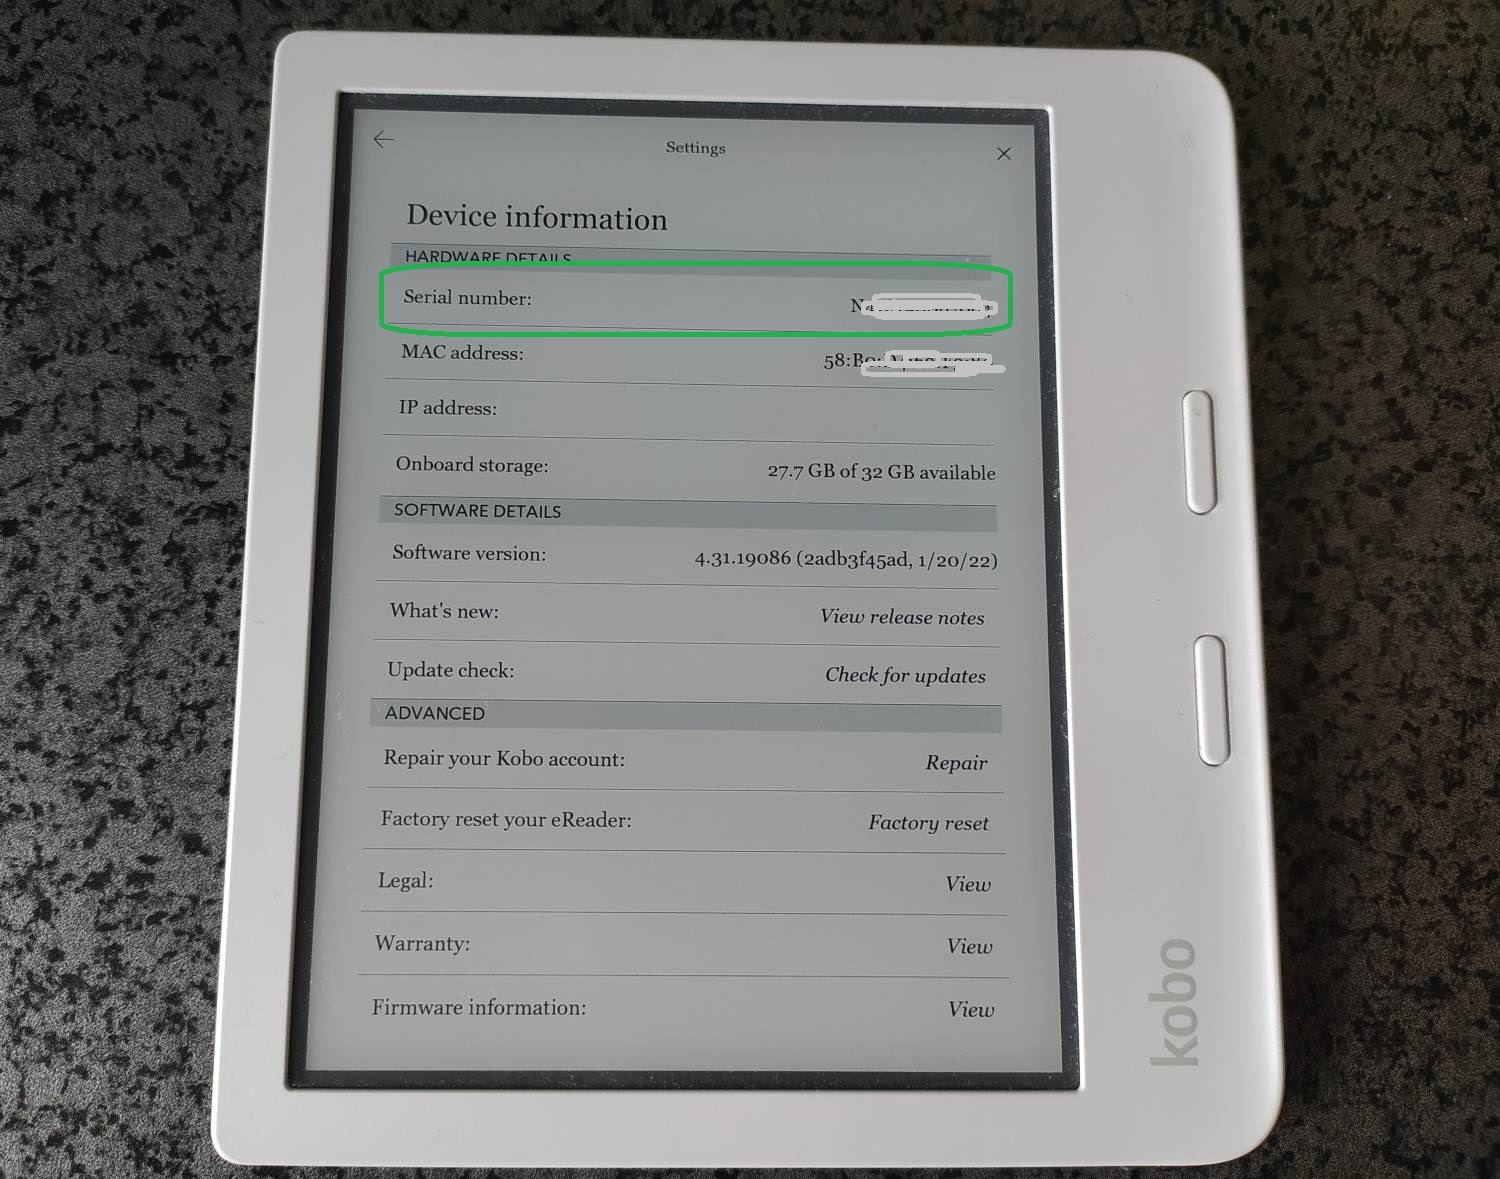 How to find your Kobo e-reader model and serial number?